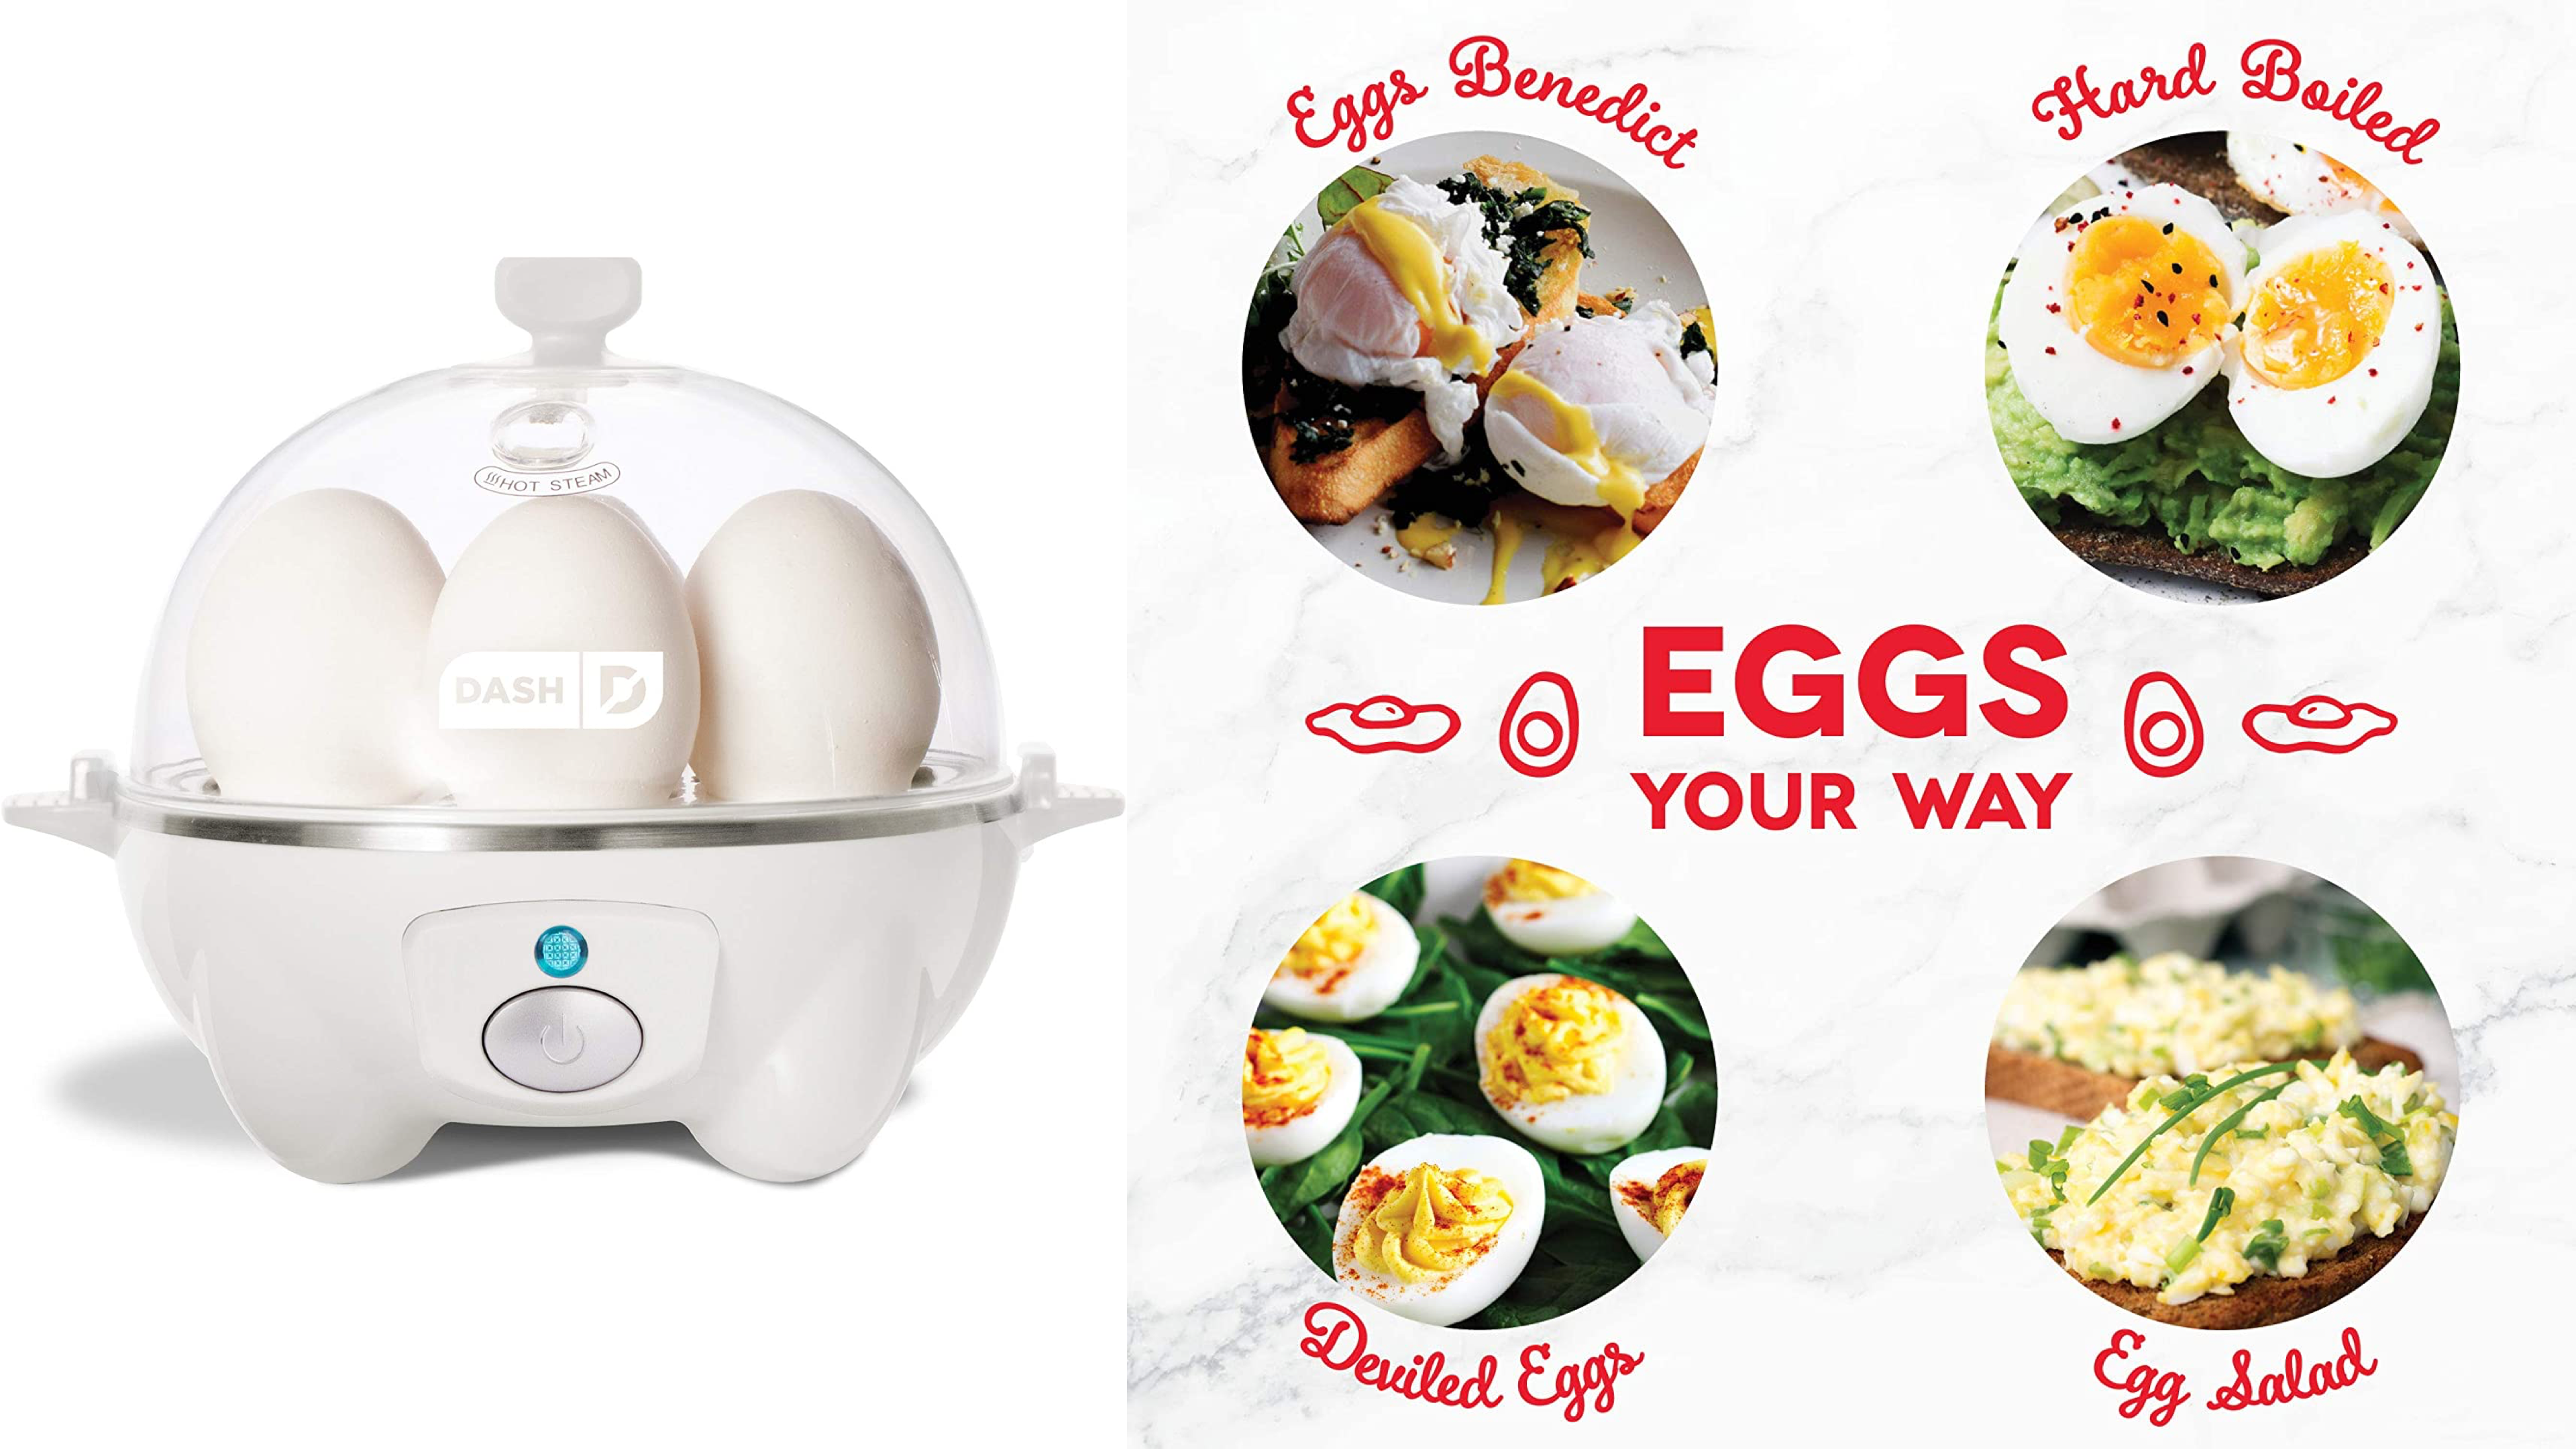 self-timed egg cooker that can automatically cook eggs for you in various styles